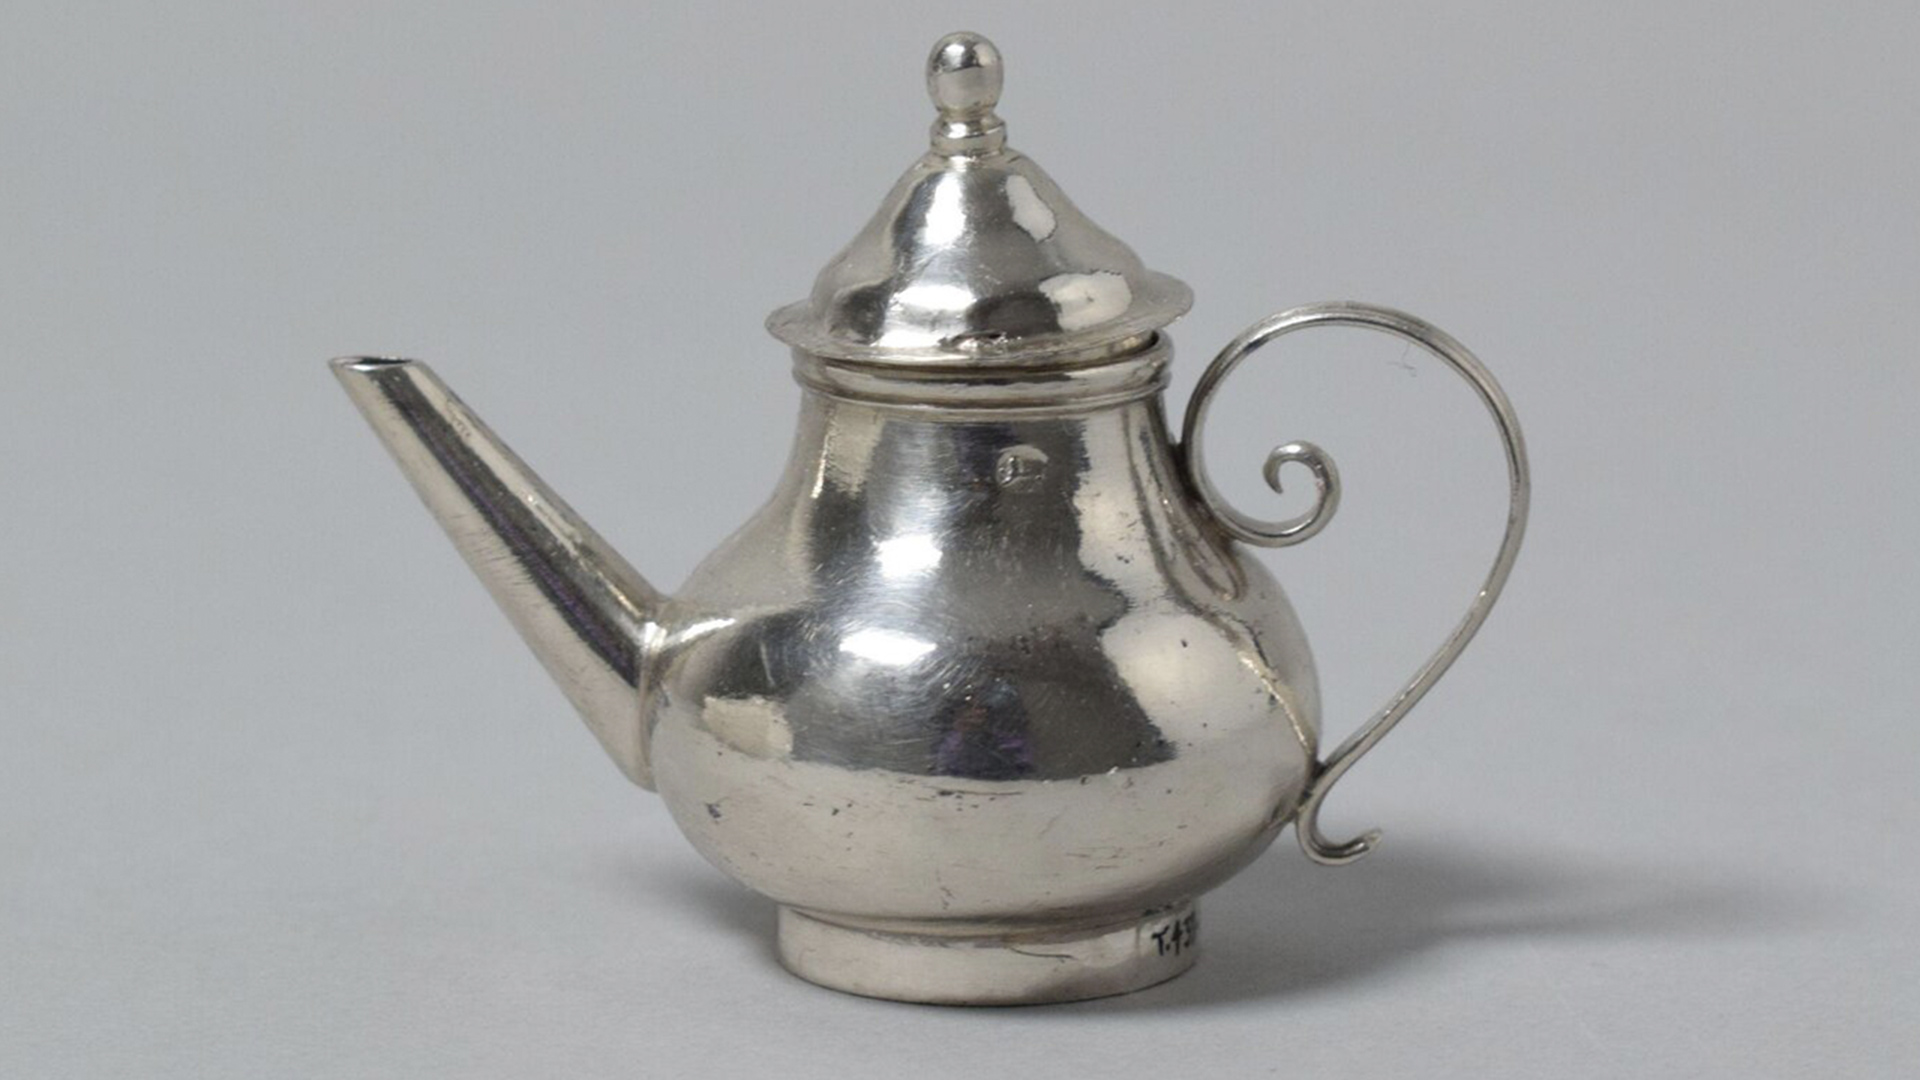 Toy silver teapot with cover